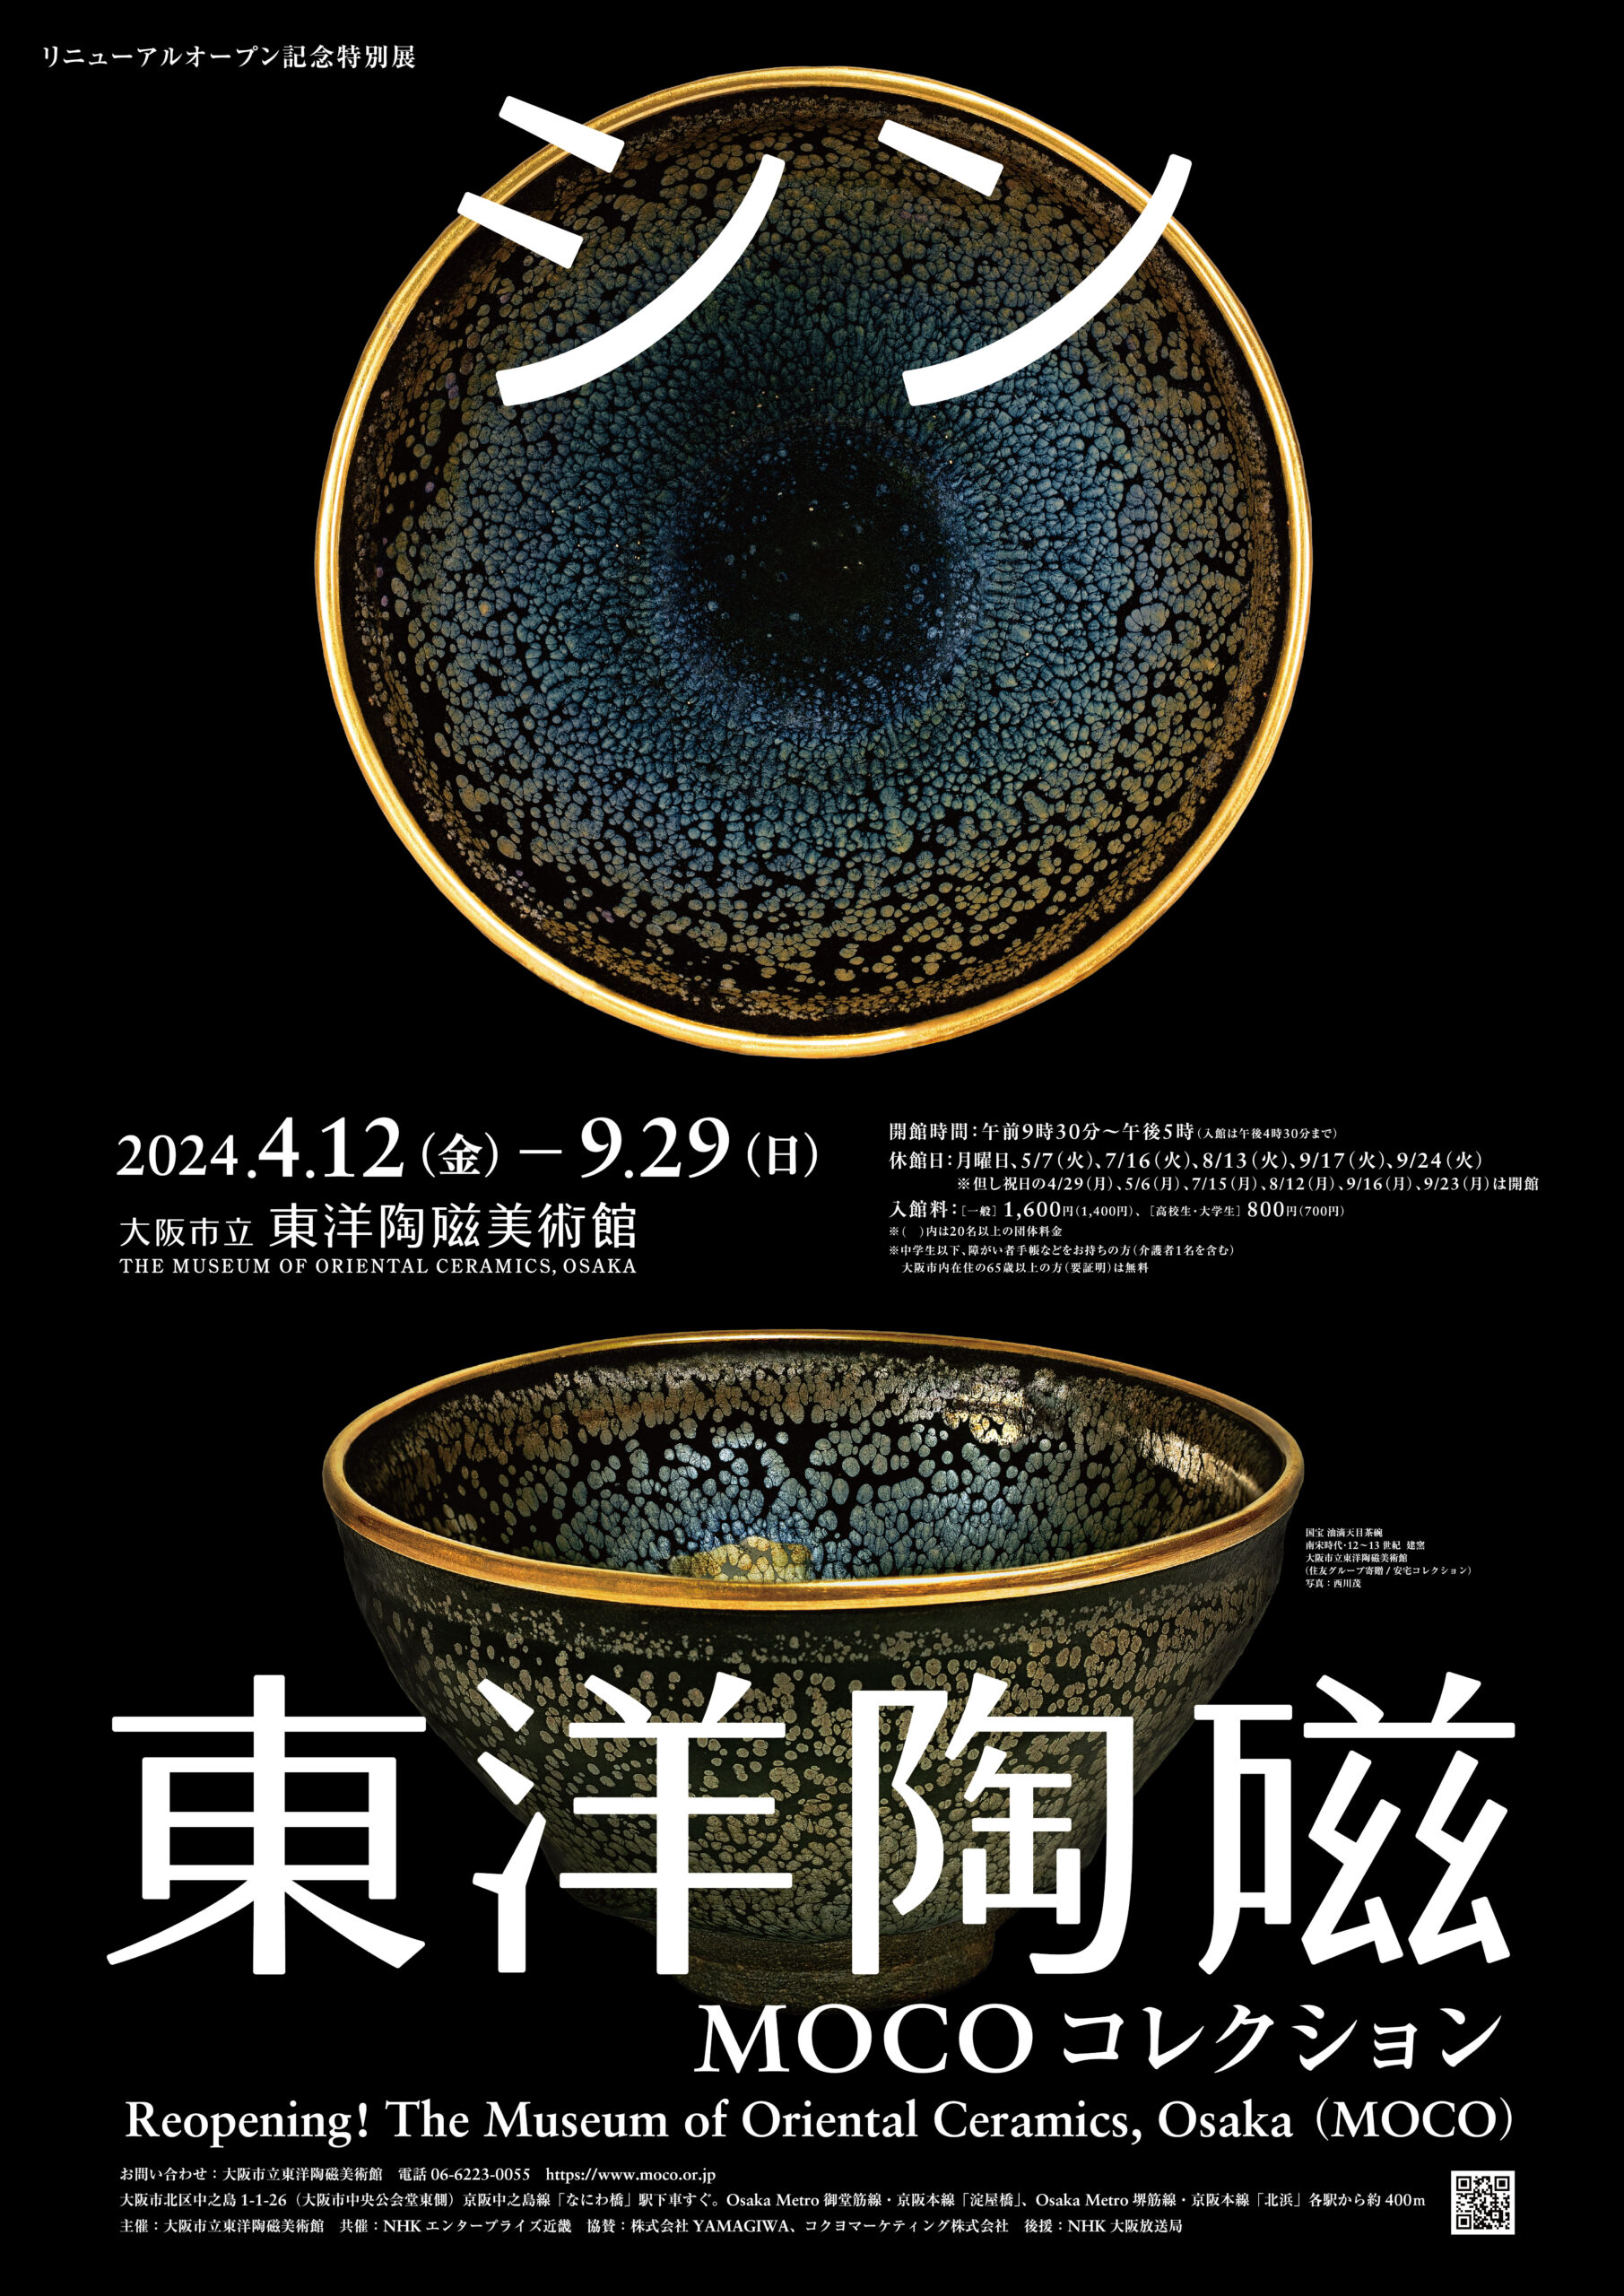 Special Exhibition: Reopening!The Museum of Oriental Ceramics,Osaka(MOCO)